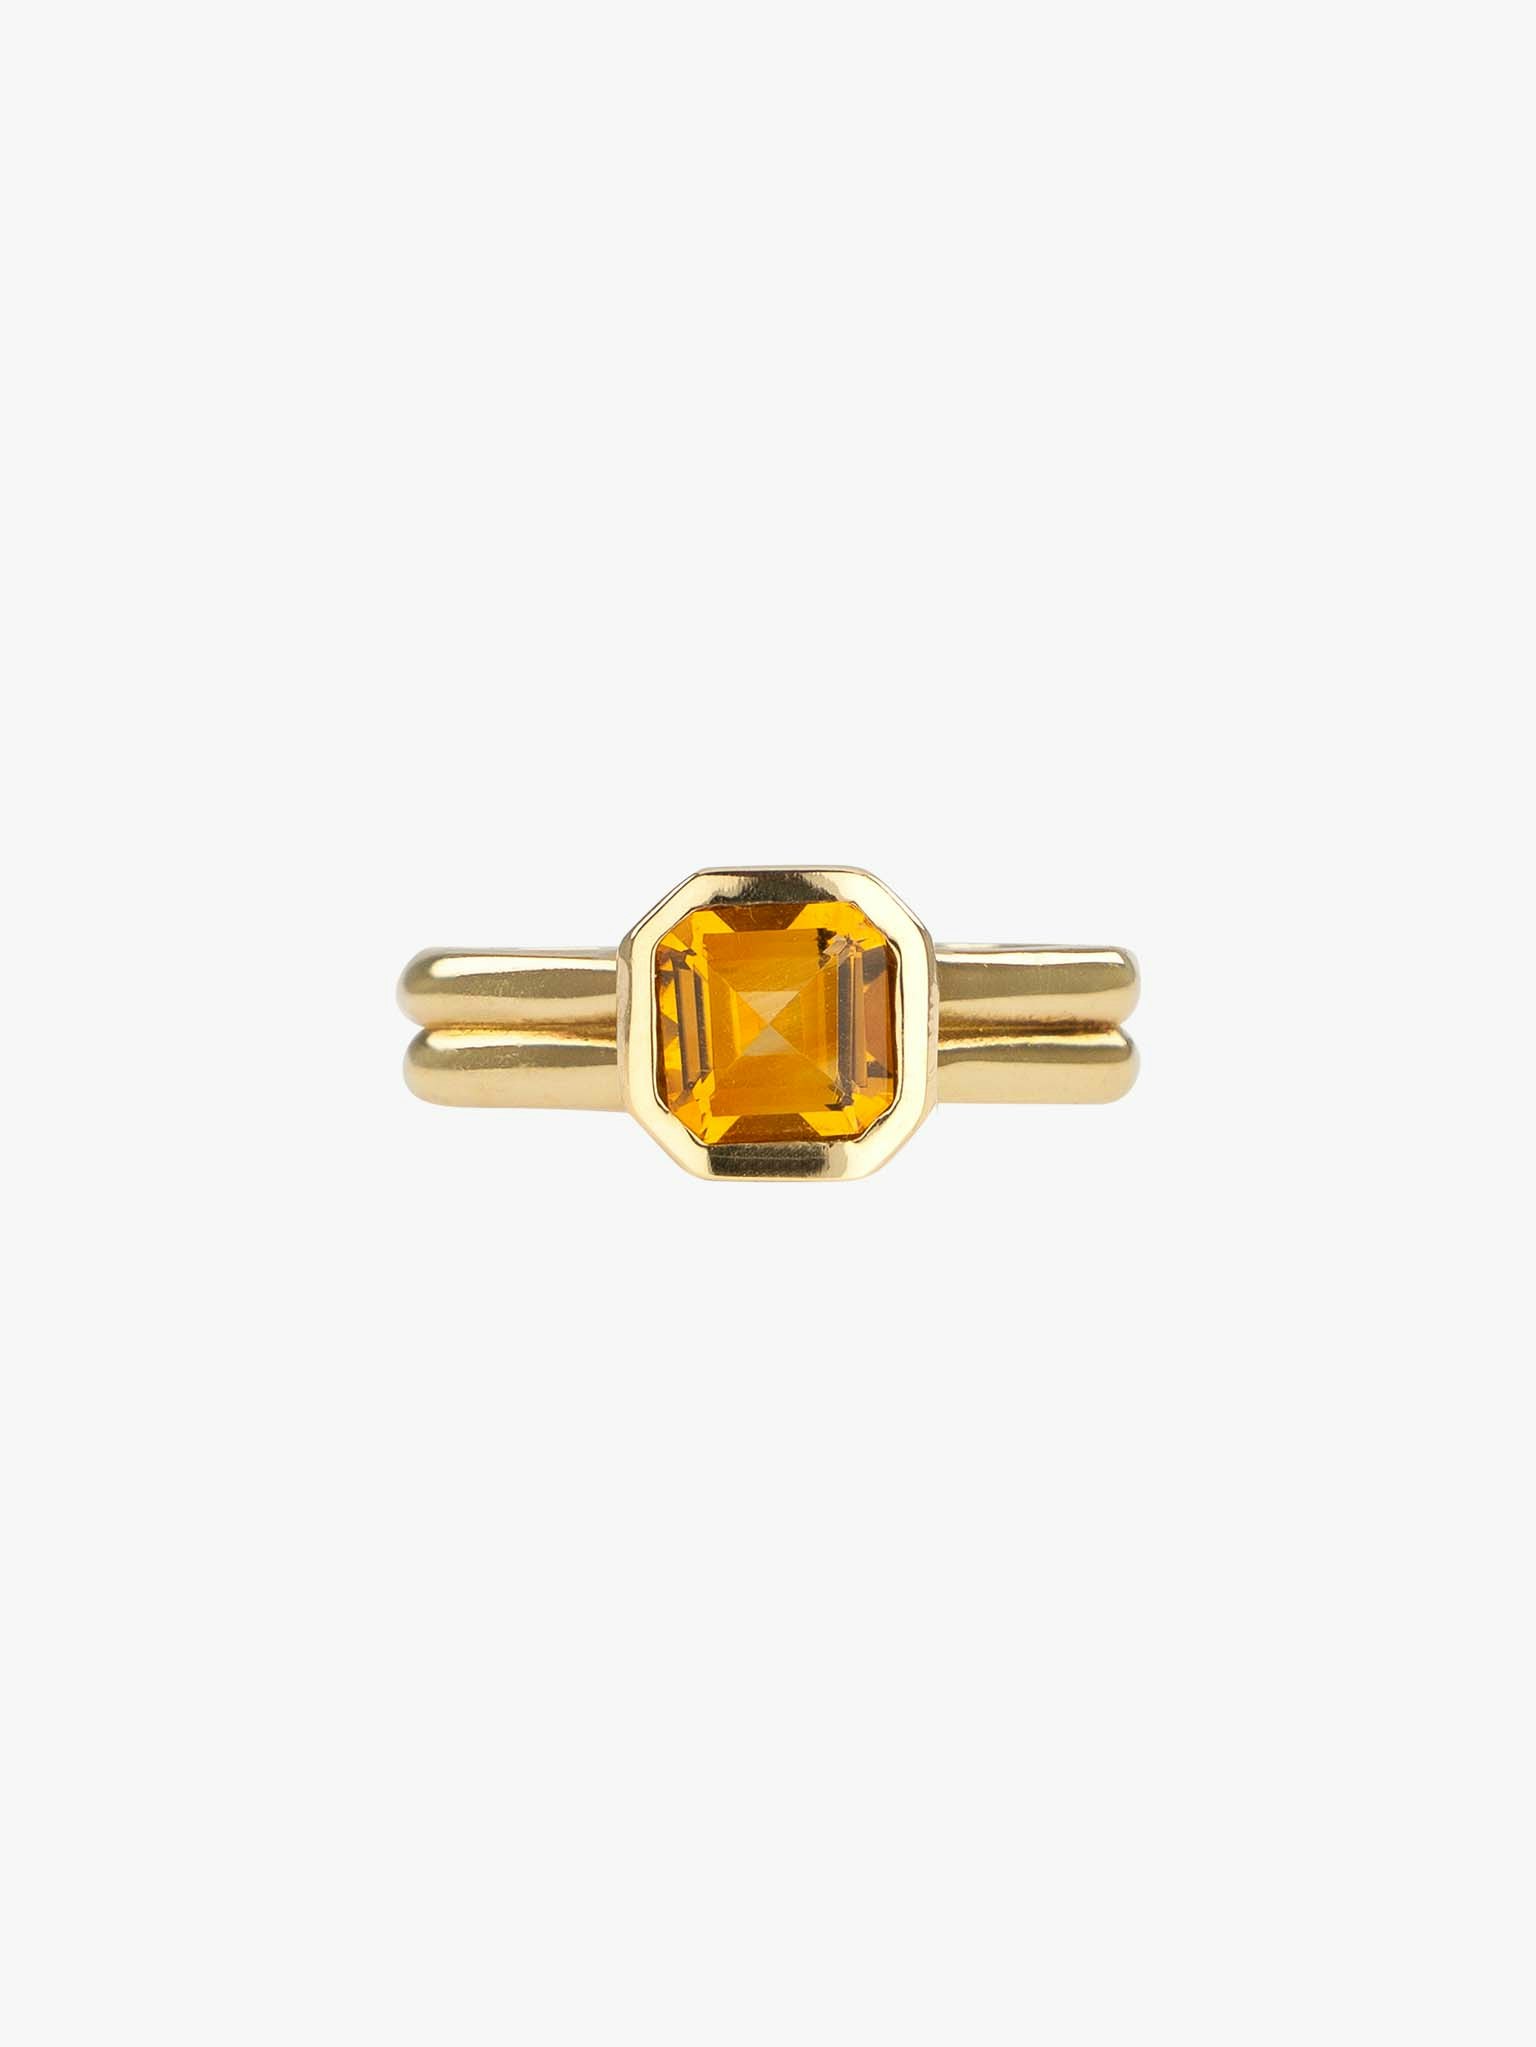 The lorde citrine ring photo 1